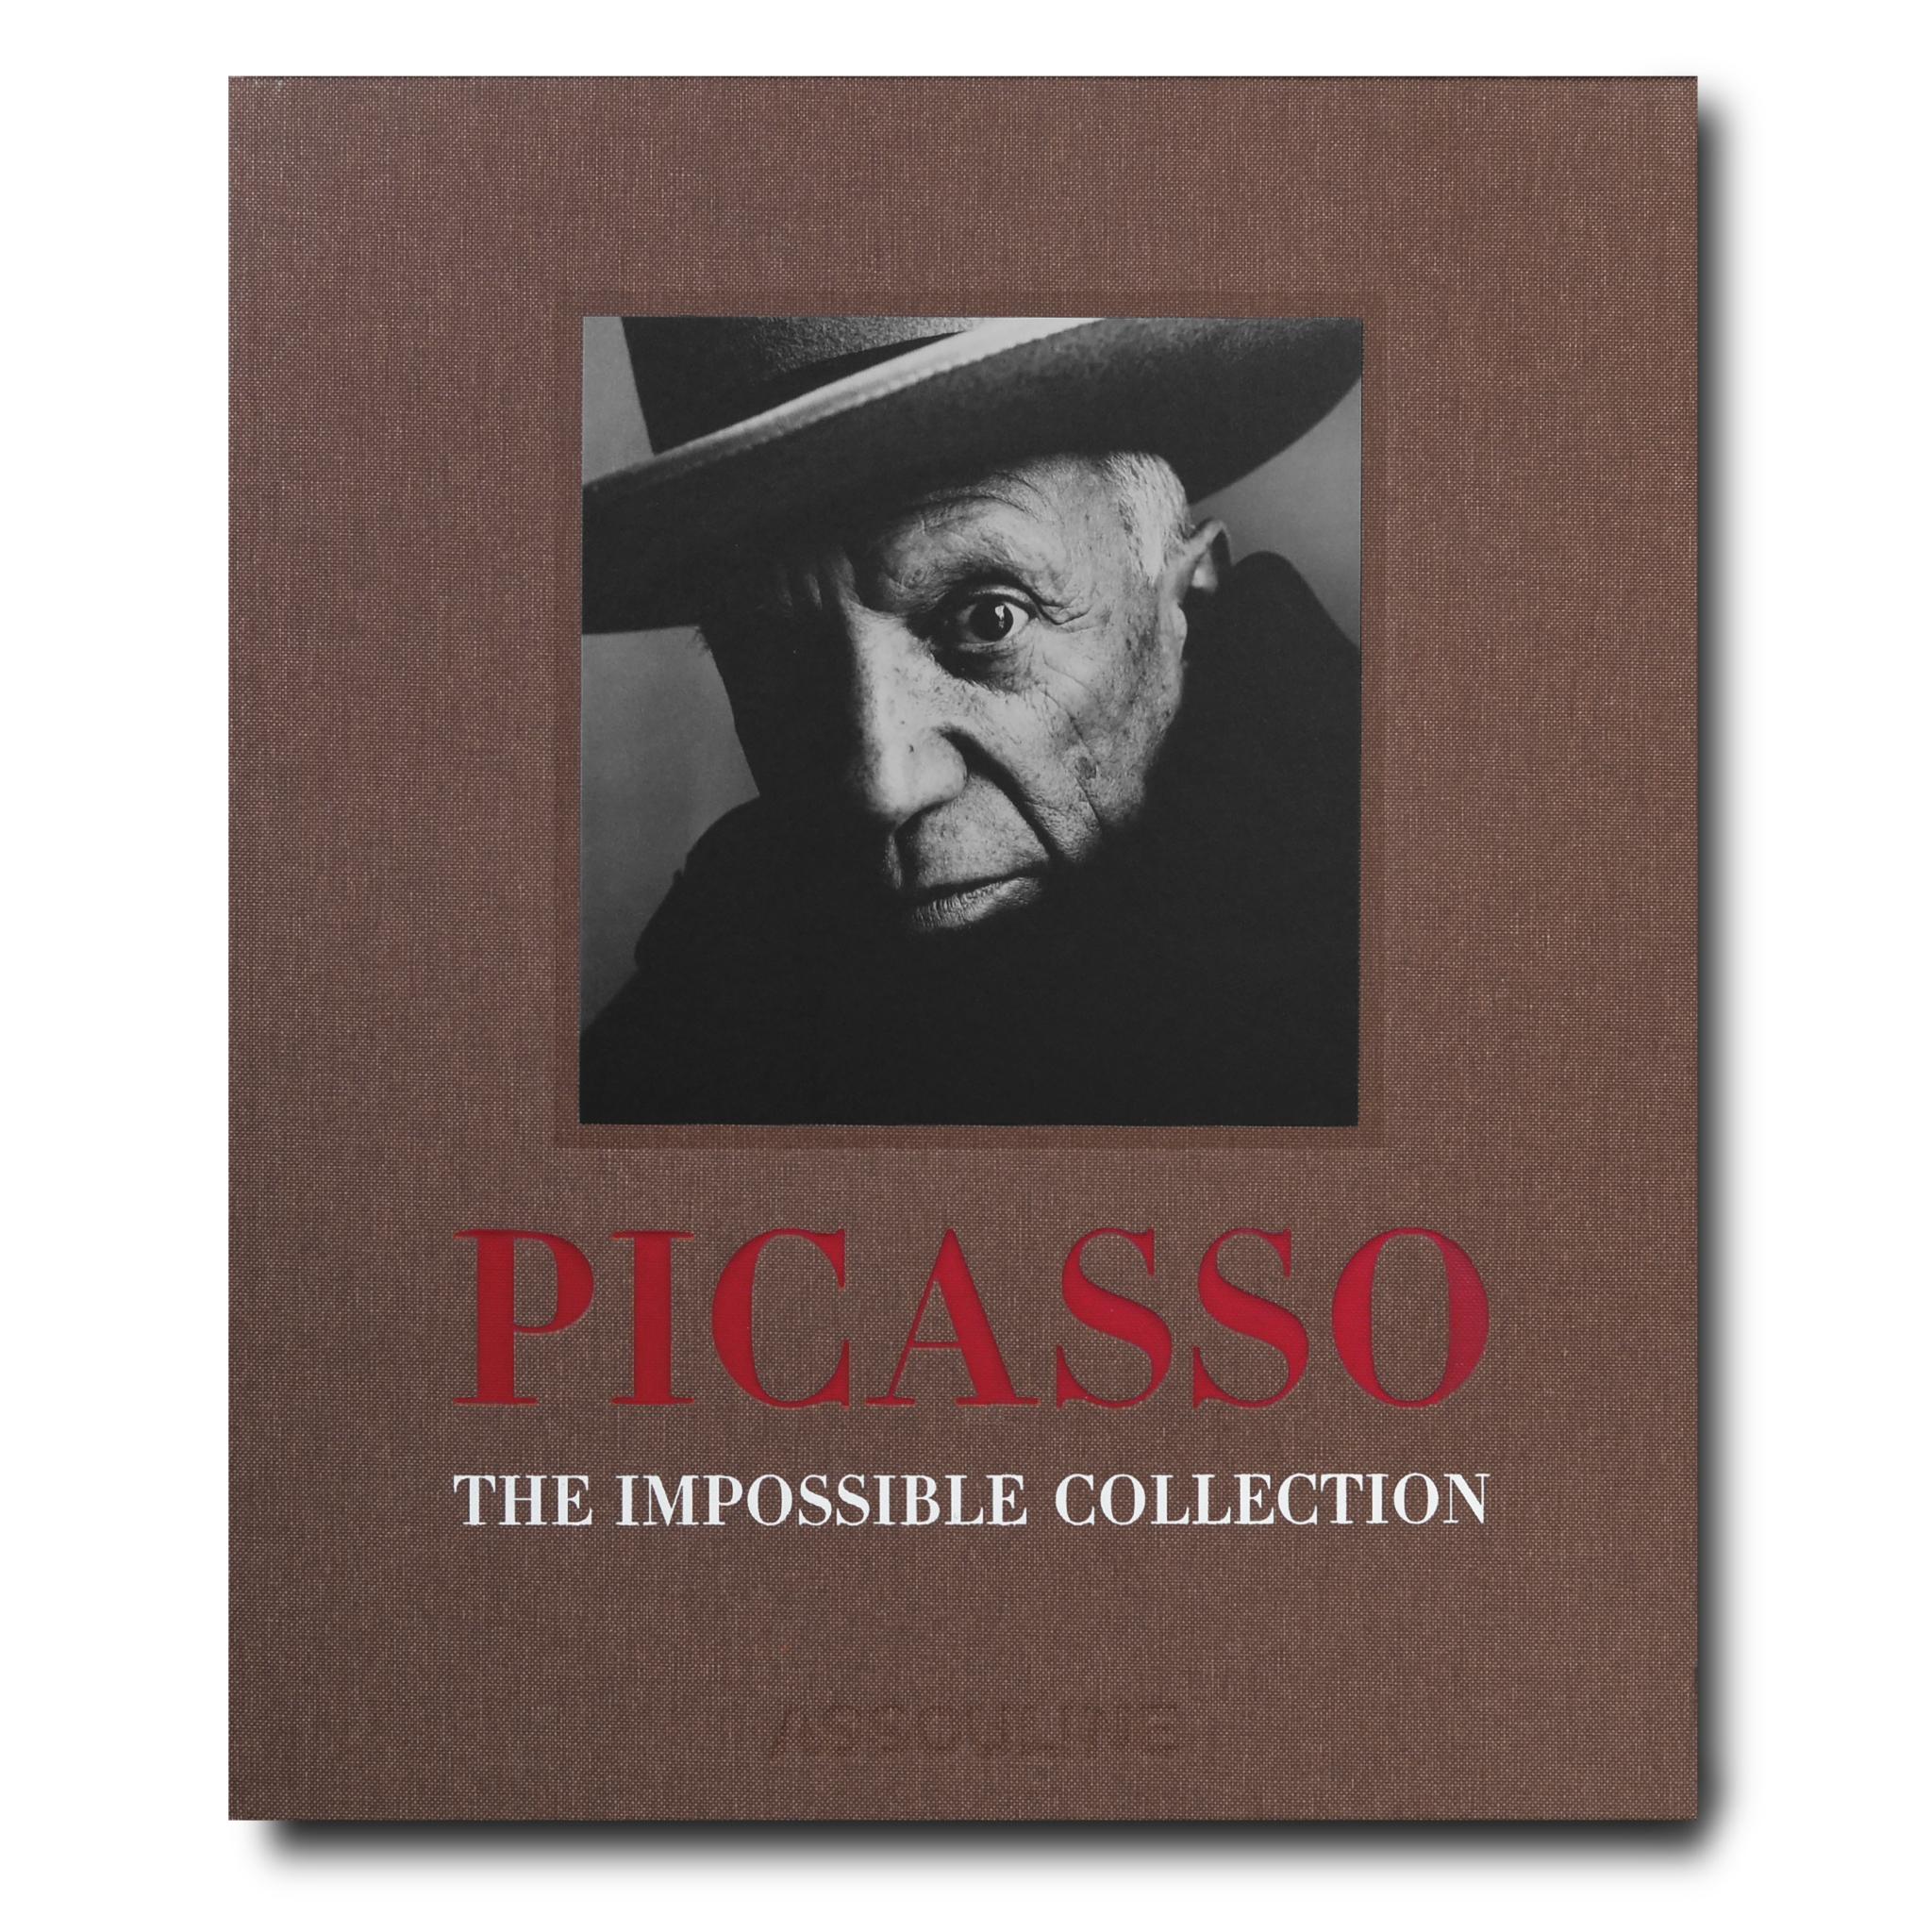 Pablo Picasso redefined artwork throughout his extraordinary career, becoming indisputably one of the most influential artists of the twentieth century. In this evocative volume, the artist’s granddaughter, Diana Widmaier Picasso, curates the 100